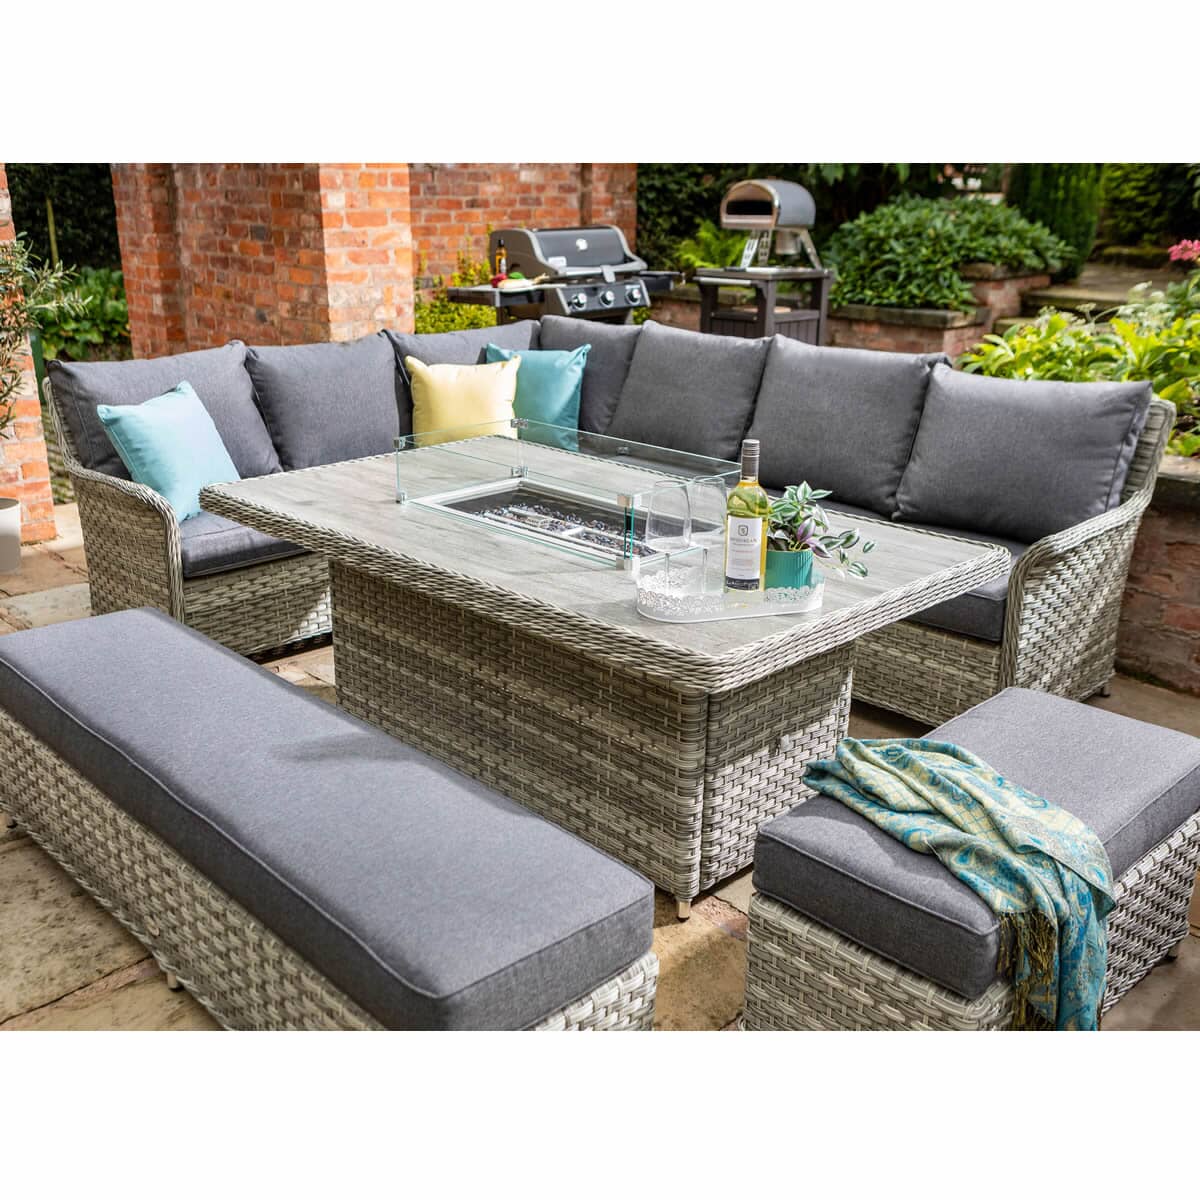 Hartman Heritage Tuscan Grand Rectangular Casual Dining Corner Set with Gas Fire Pit Table Ash/Slate